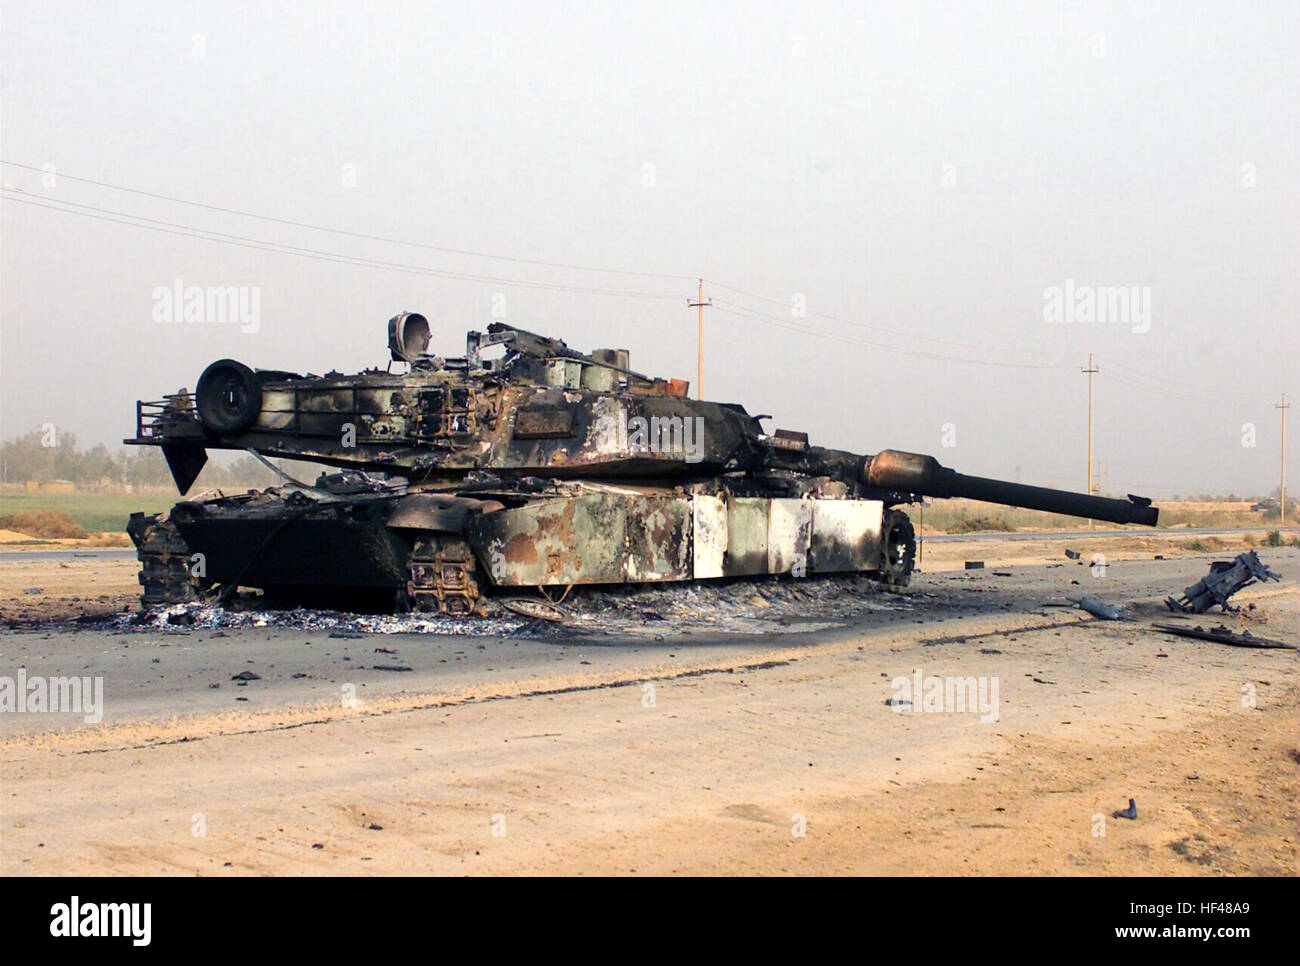 A scuttled M1A1 Abrams Main Battle Tank (MBT) rests in front of a Fedayeen camp just outside of Jaman Al Juburi, Iraq during Operation IRAQI FREEDOM. DM-SD-04-07075 Stock Photo